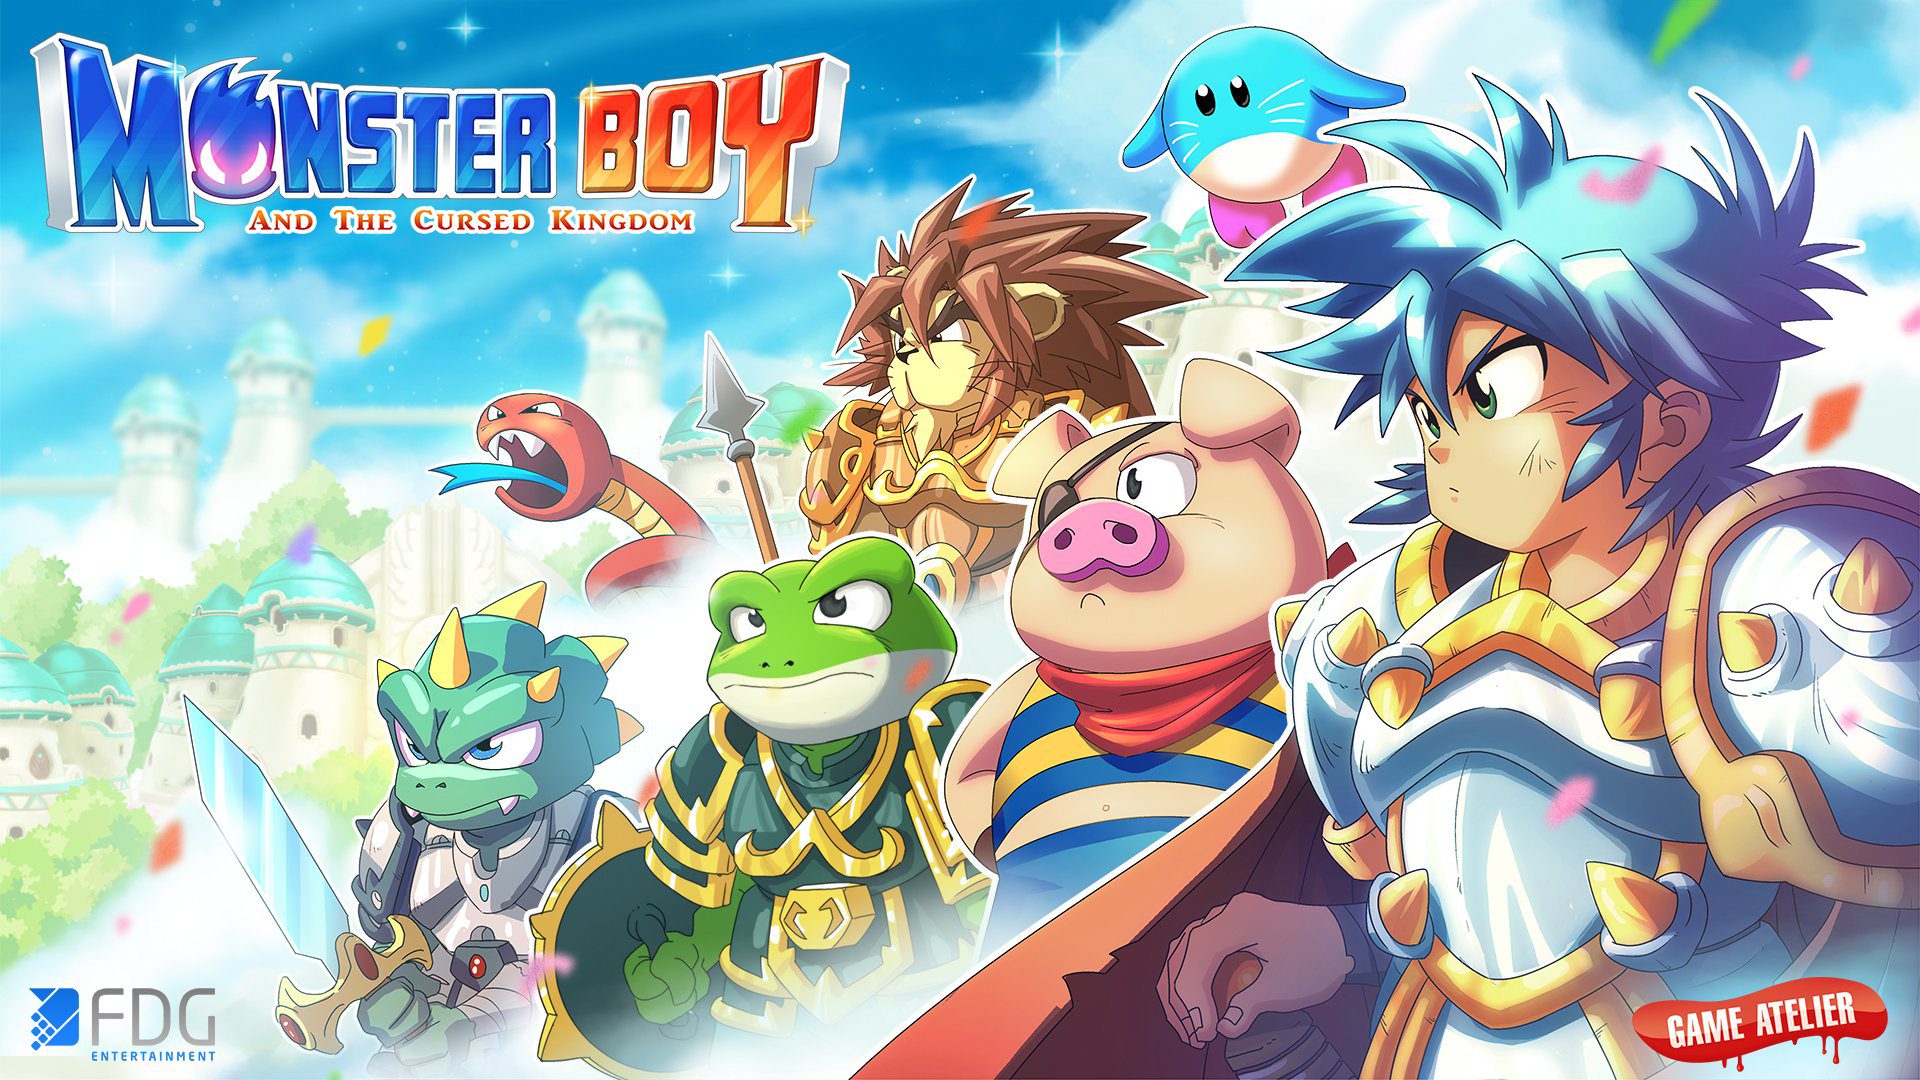 Our time with Monster Boy and the Cursed Kingdom at E3 2018